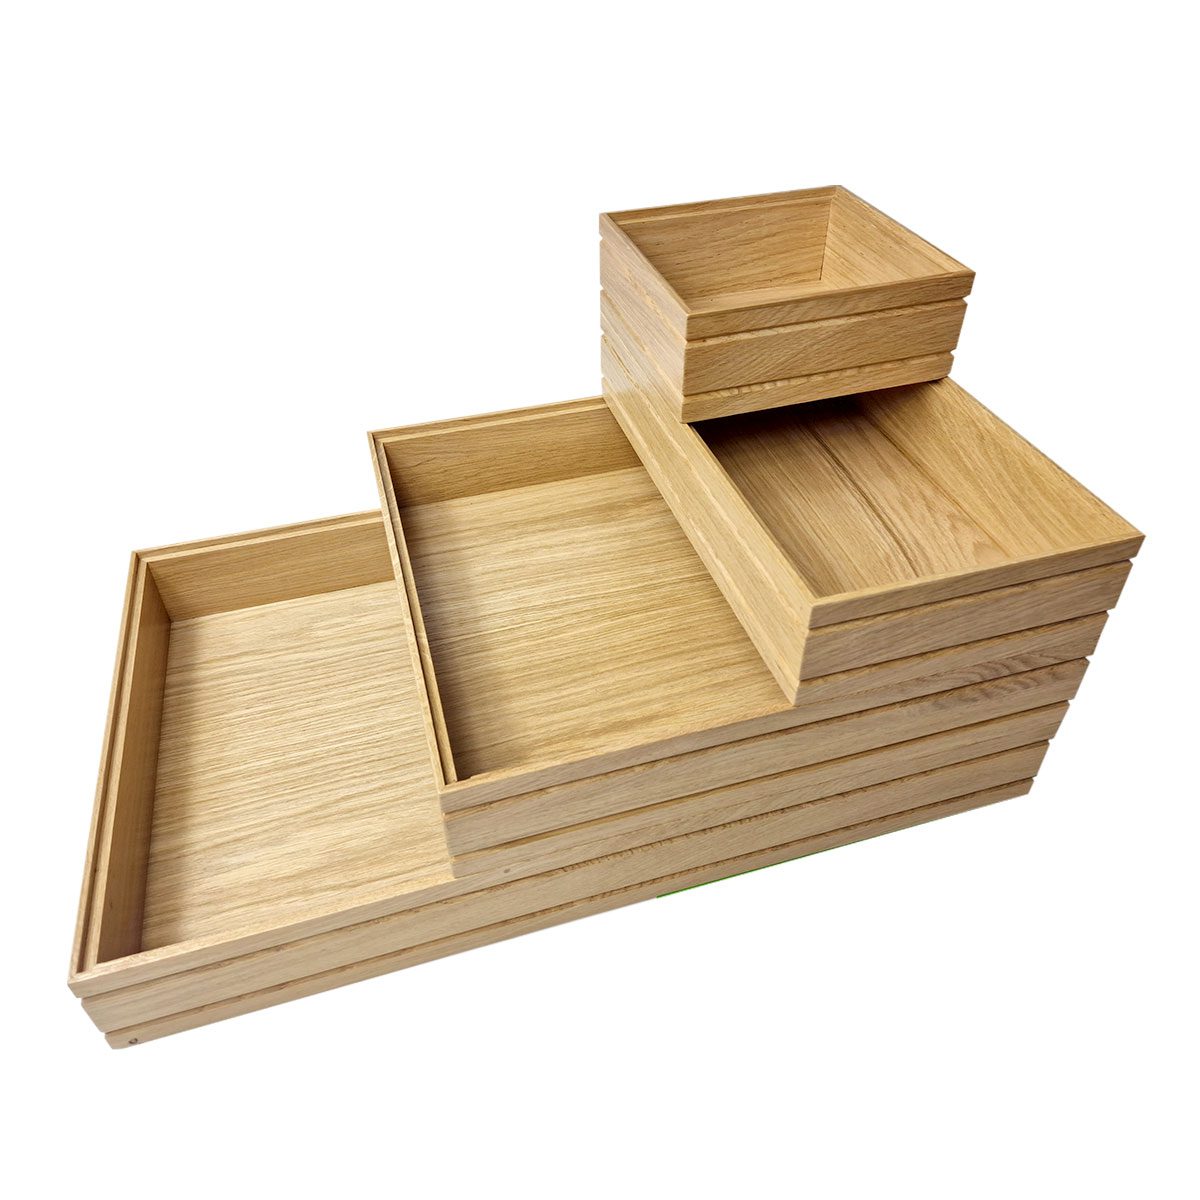 B1/6 Ribbed Natural Oak Trolley Stacker Box | Ligneus Buffet System